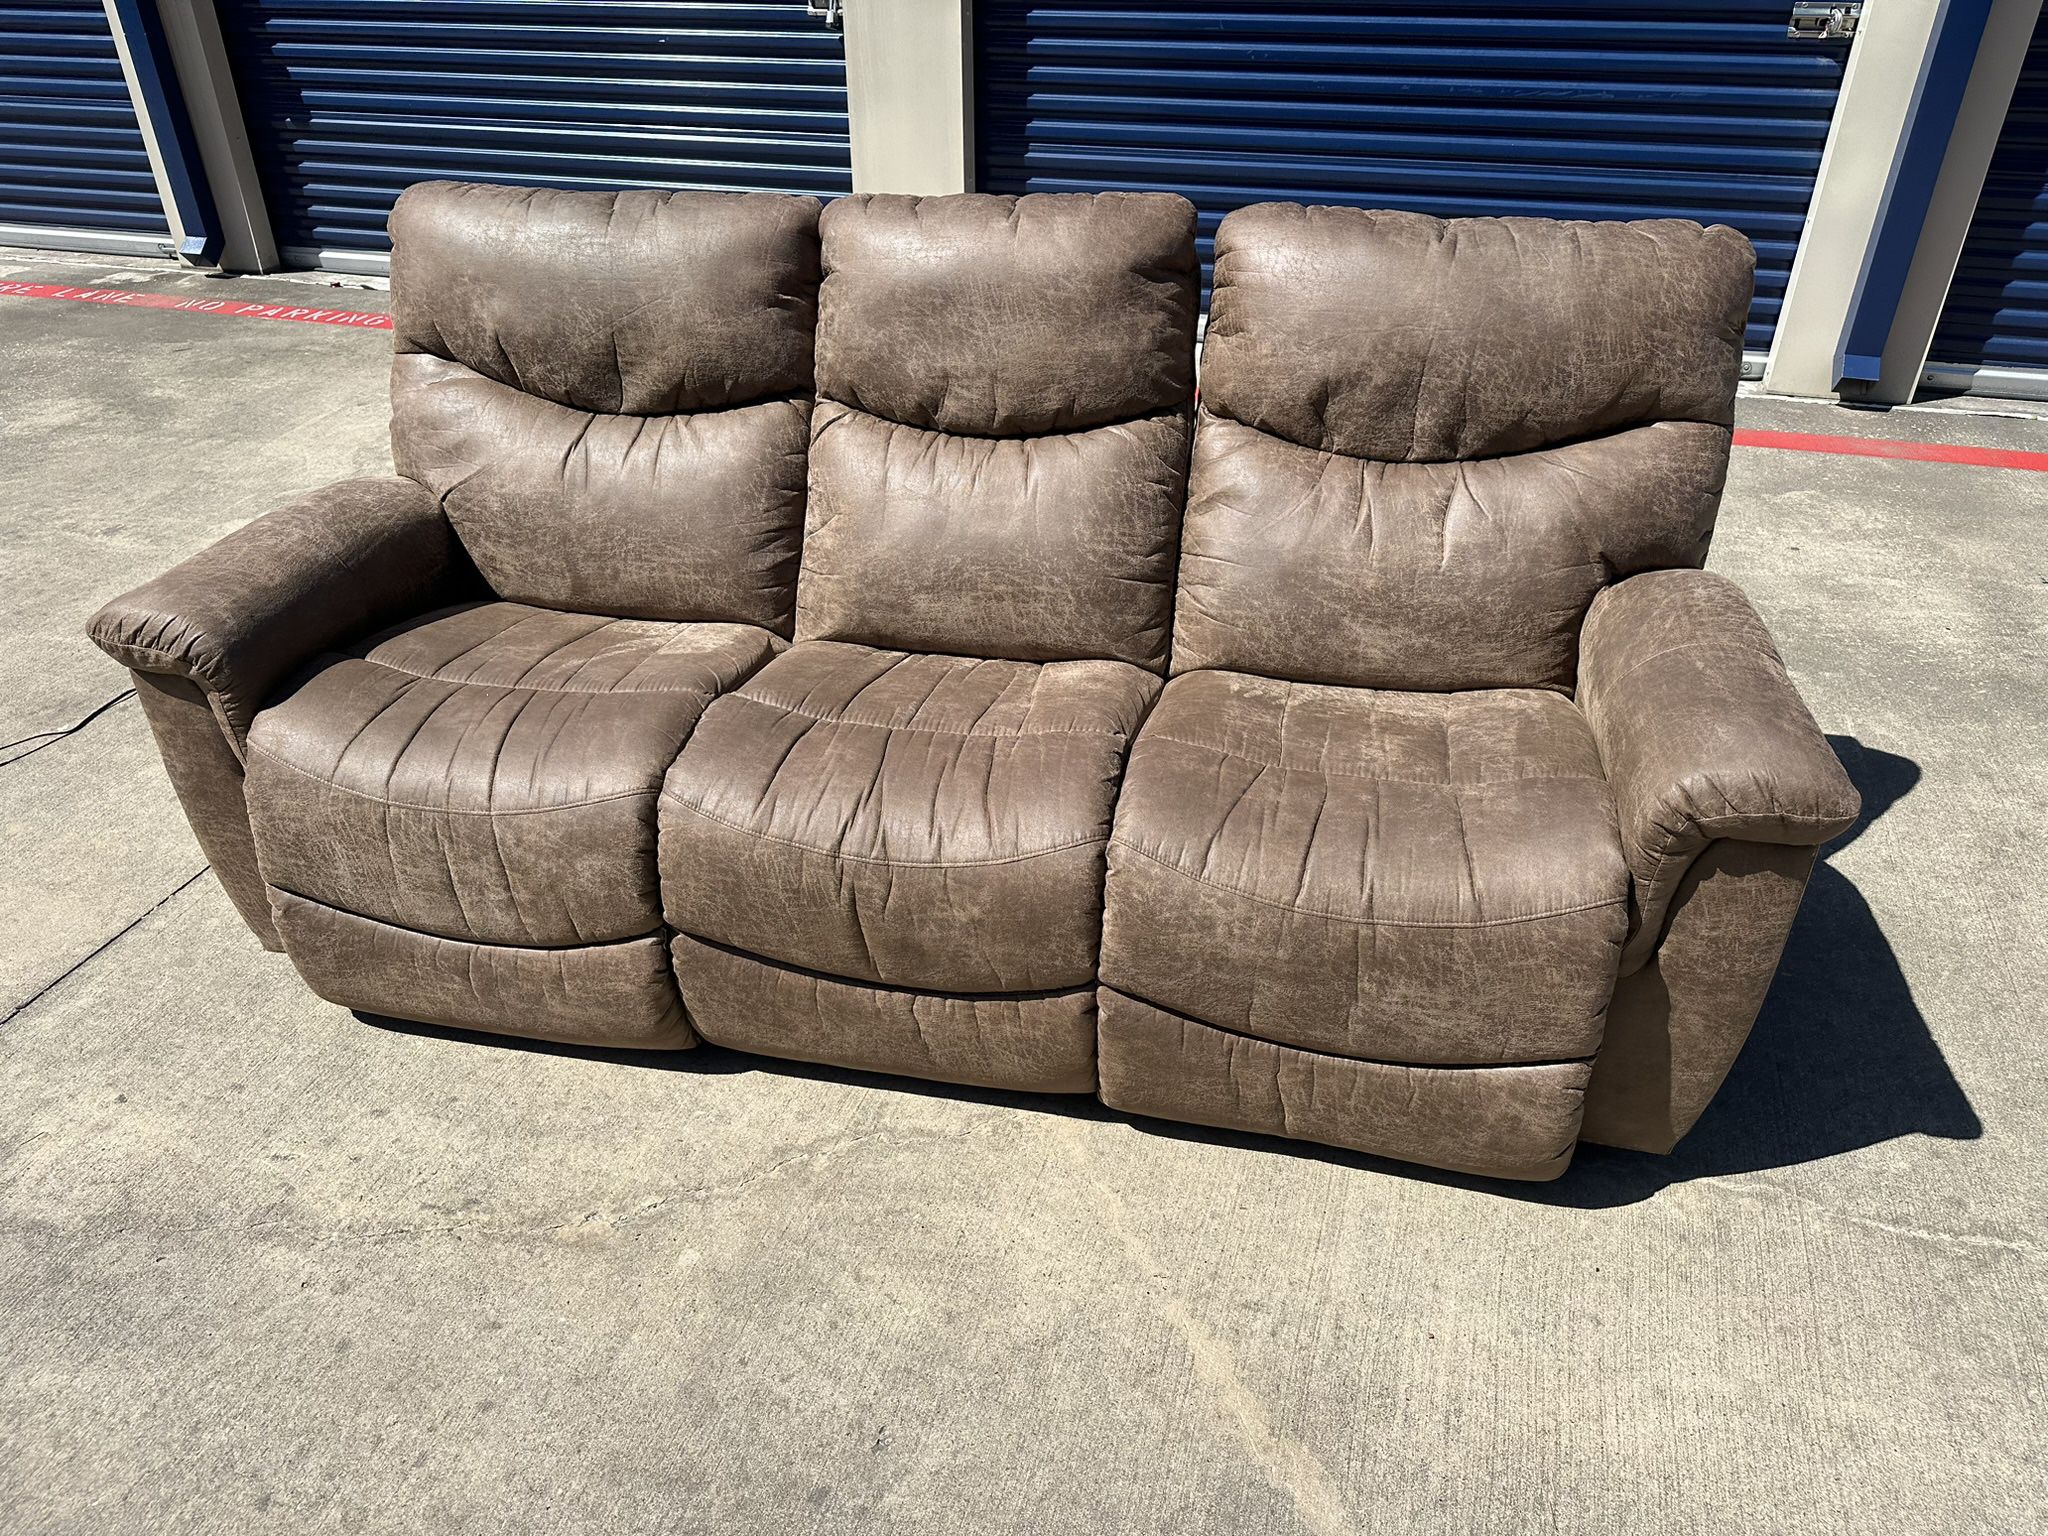 FREE DELIVERY 🚚 - Powered Reclining Couch